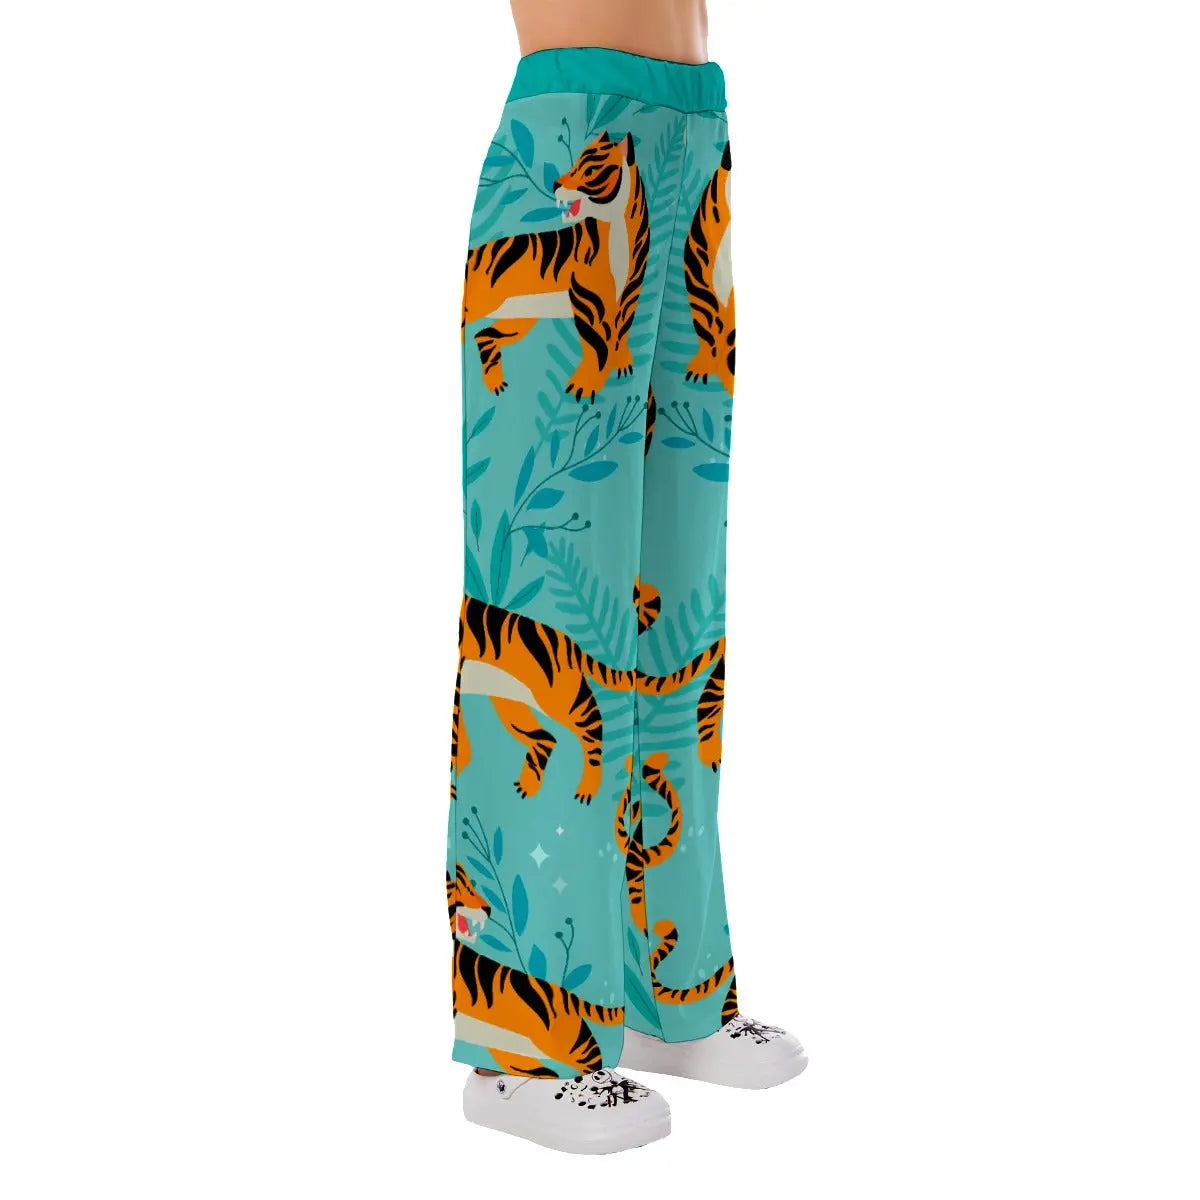 Tiger Print Pajama Shorts - Men - OBSOLETES DO NOT TOUCH